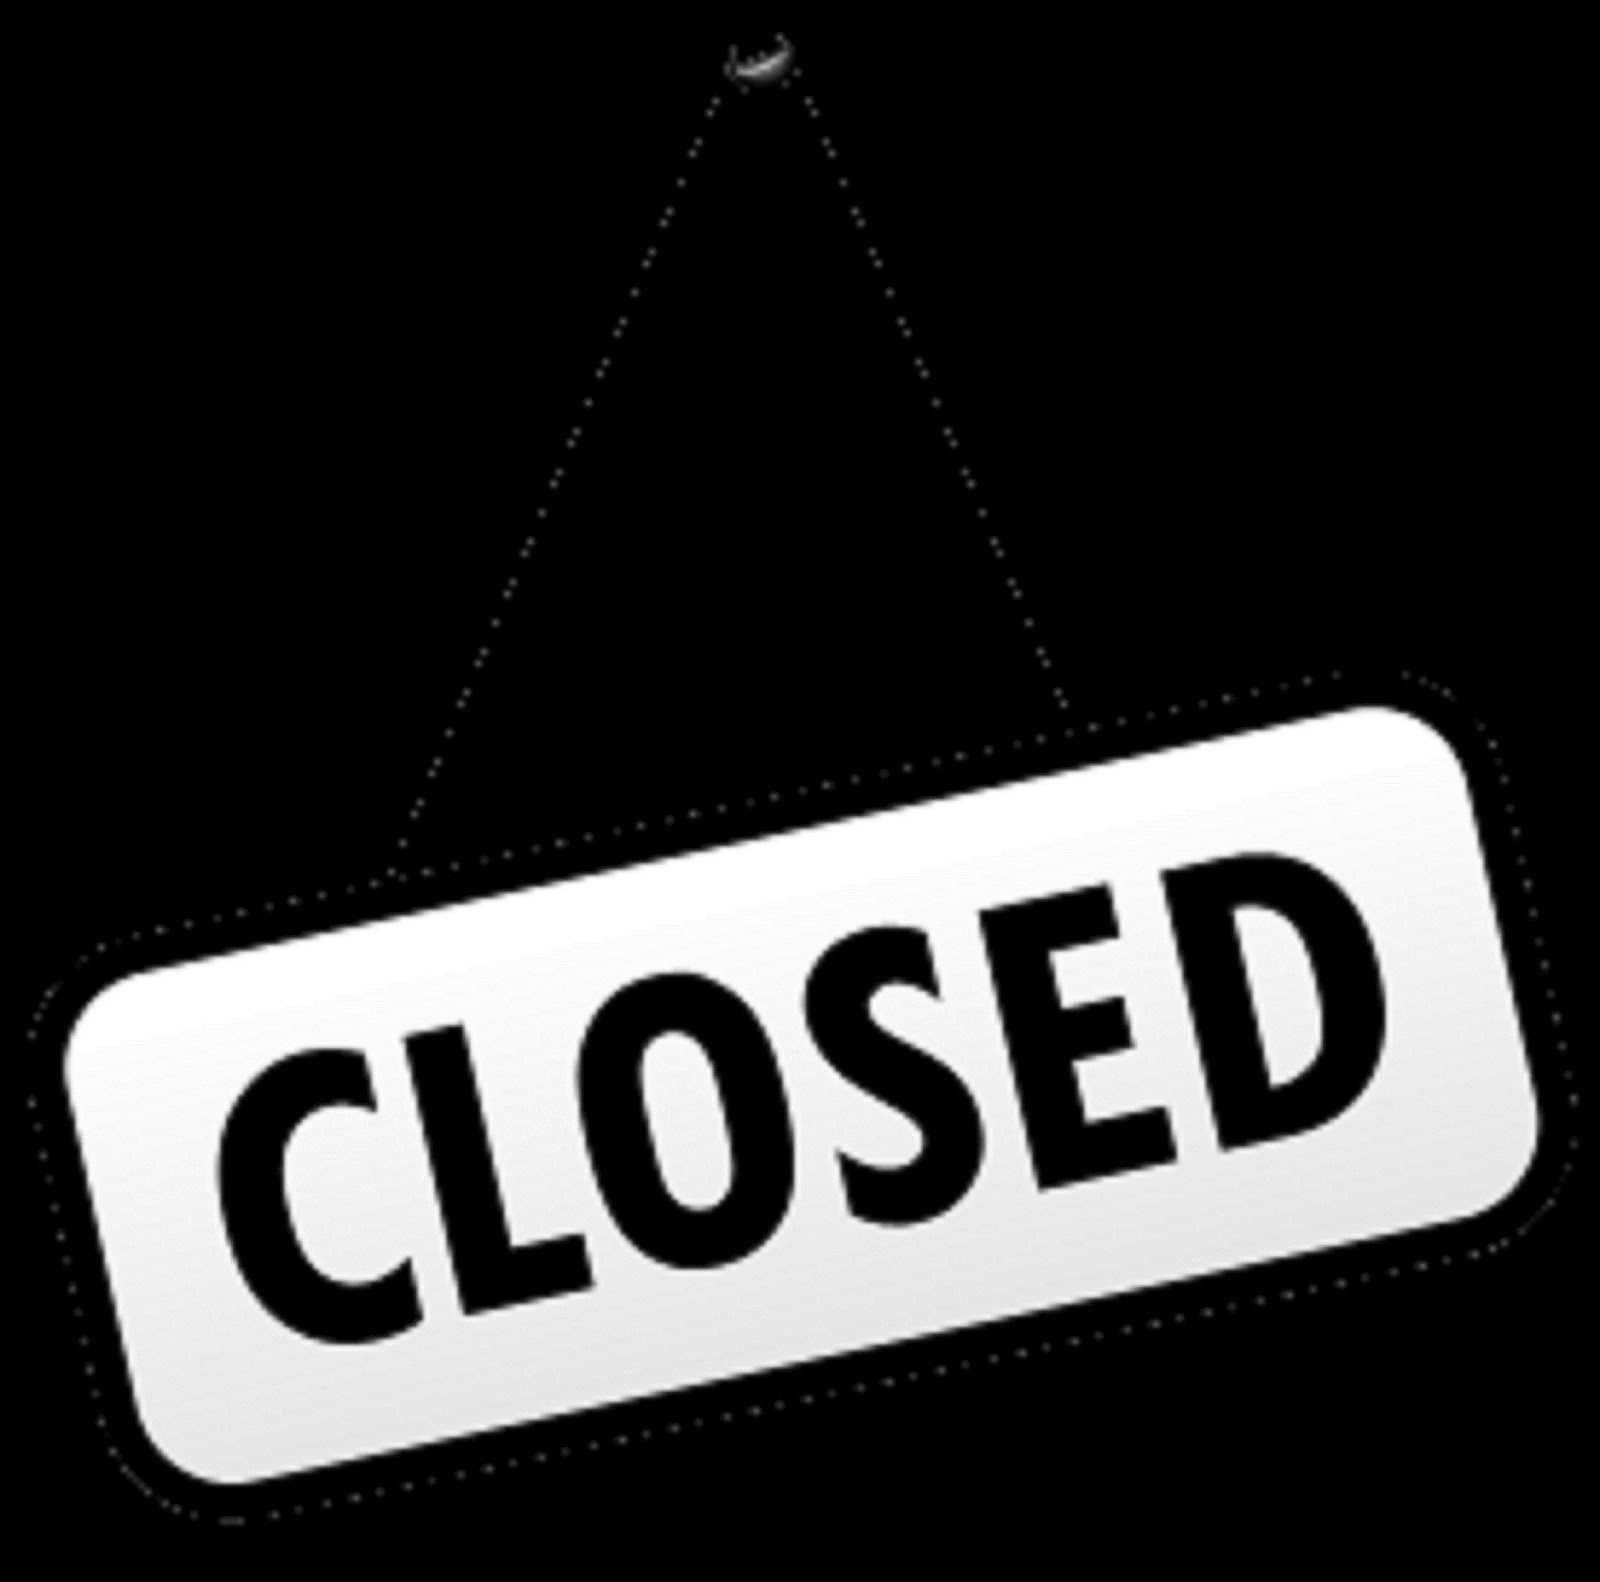 THIS SITE IS CLOSED - PLEASE CLICK ON BANNER POSTED ABOVE THIS MESSAGE TO GO TO THE KINGDOM OF HEAV